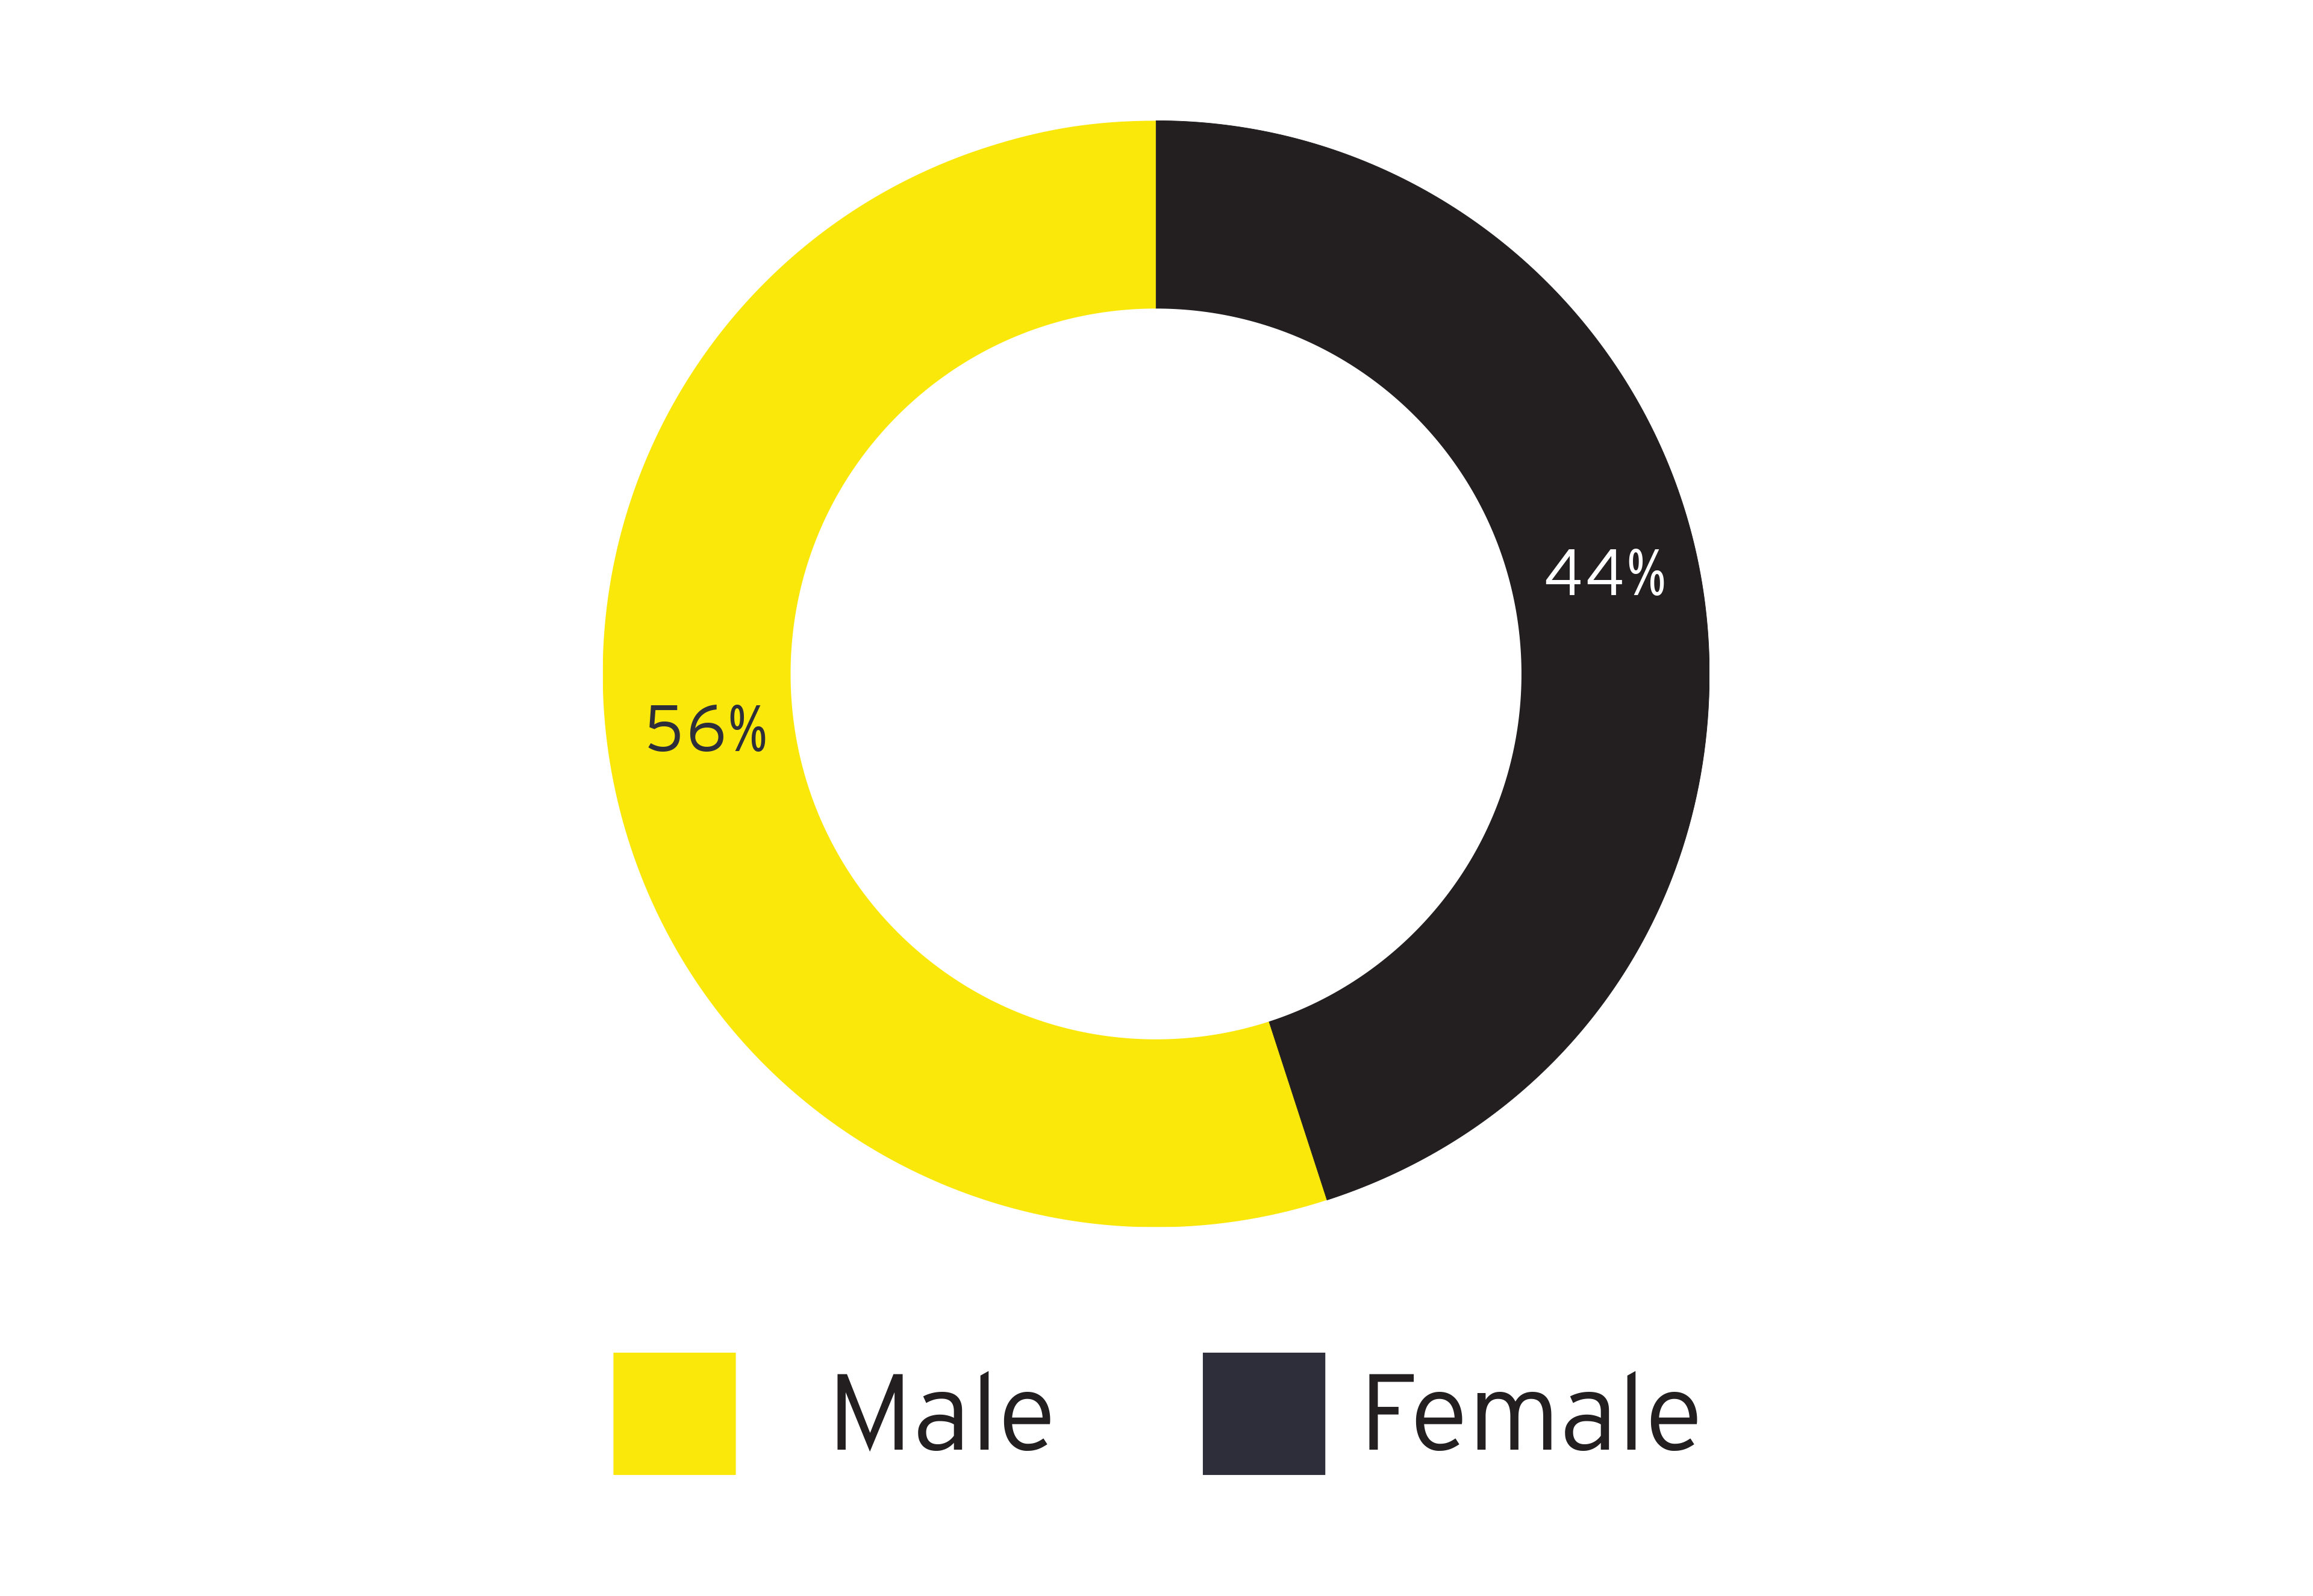 ey-appointment-new-directors-by-gender-3840px-v2